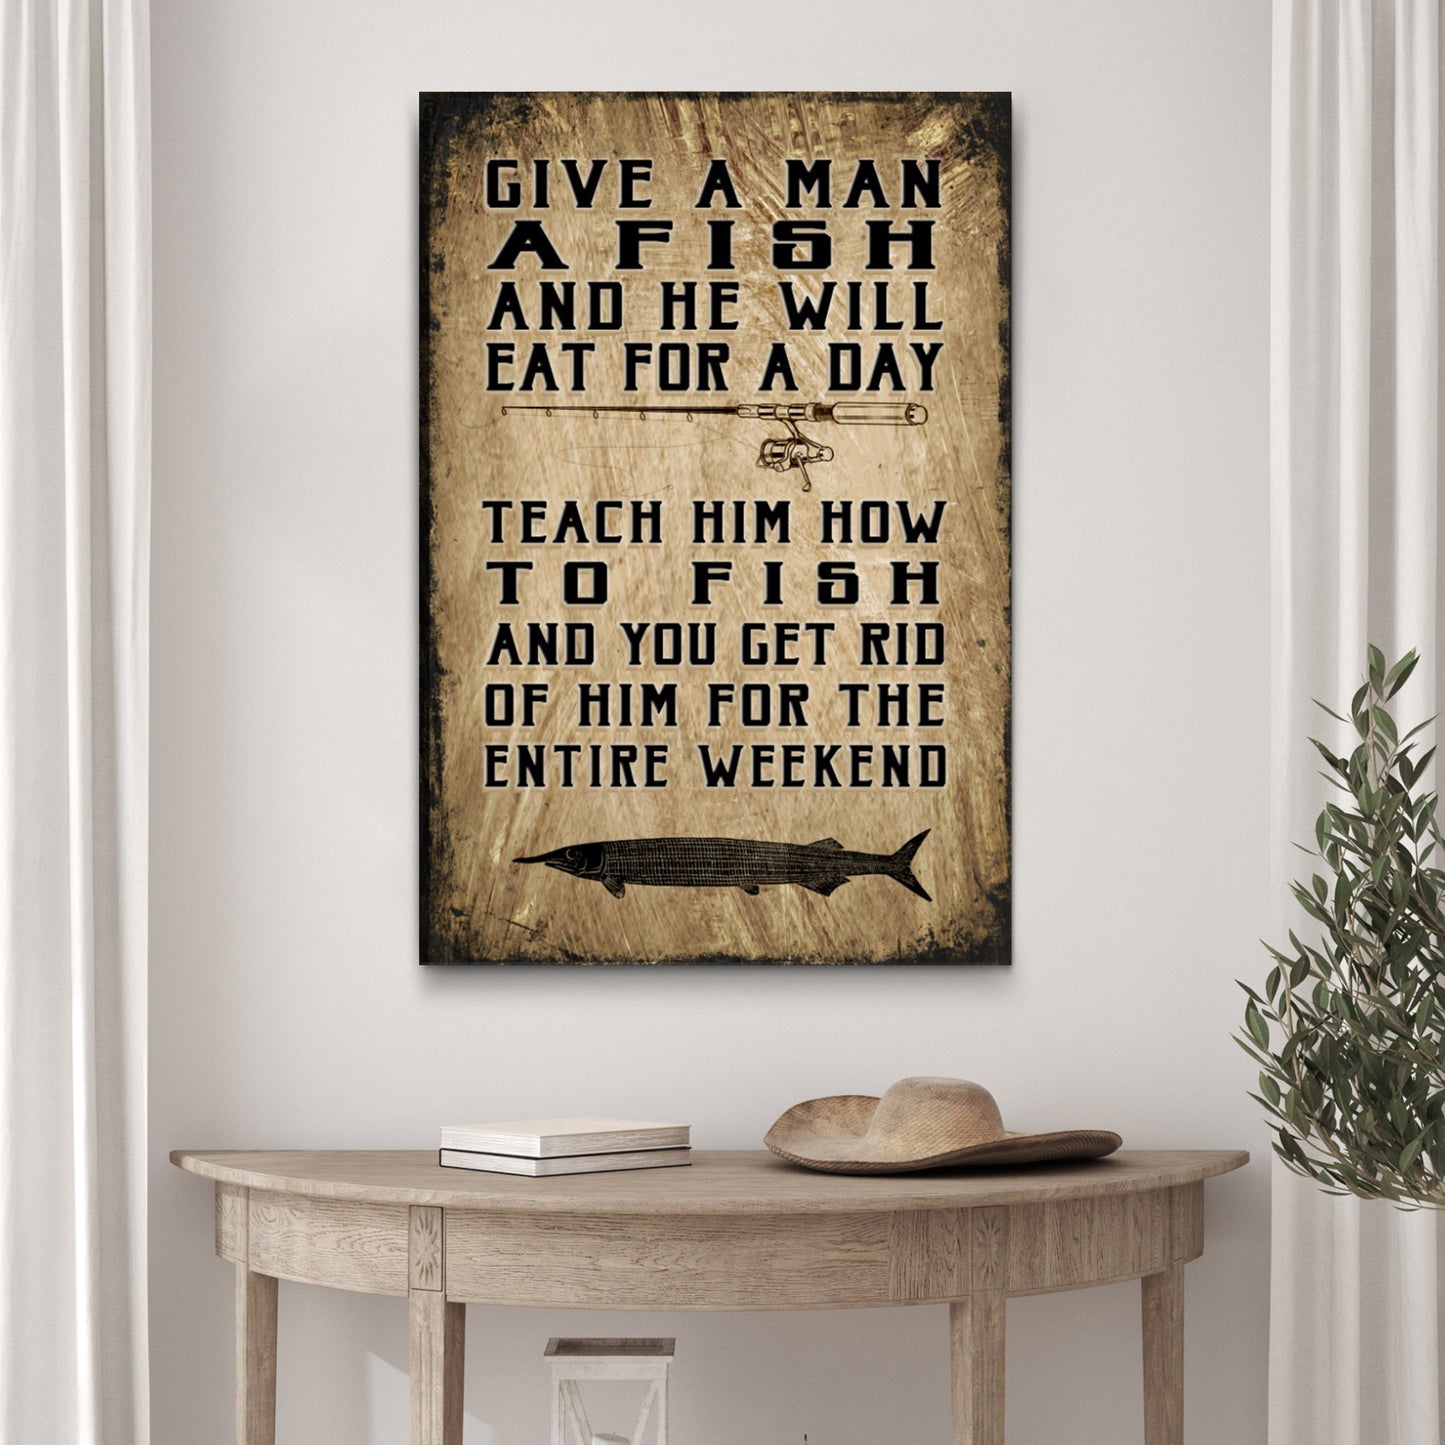 Teach A Man How To Fish And You Get Rid Of Him For The Entire Weekend Sign II Style 2 - Image by Tailored Canvases